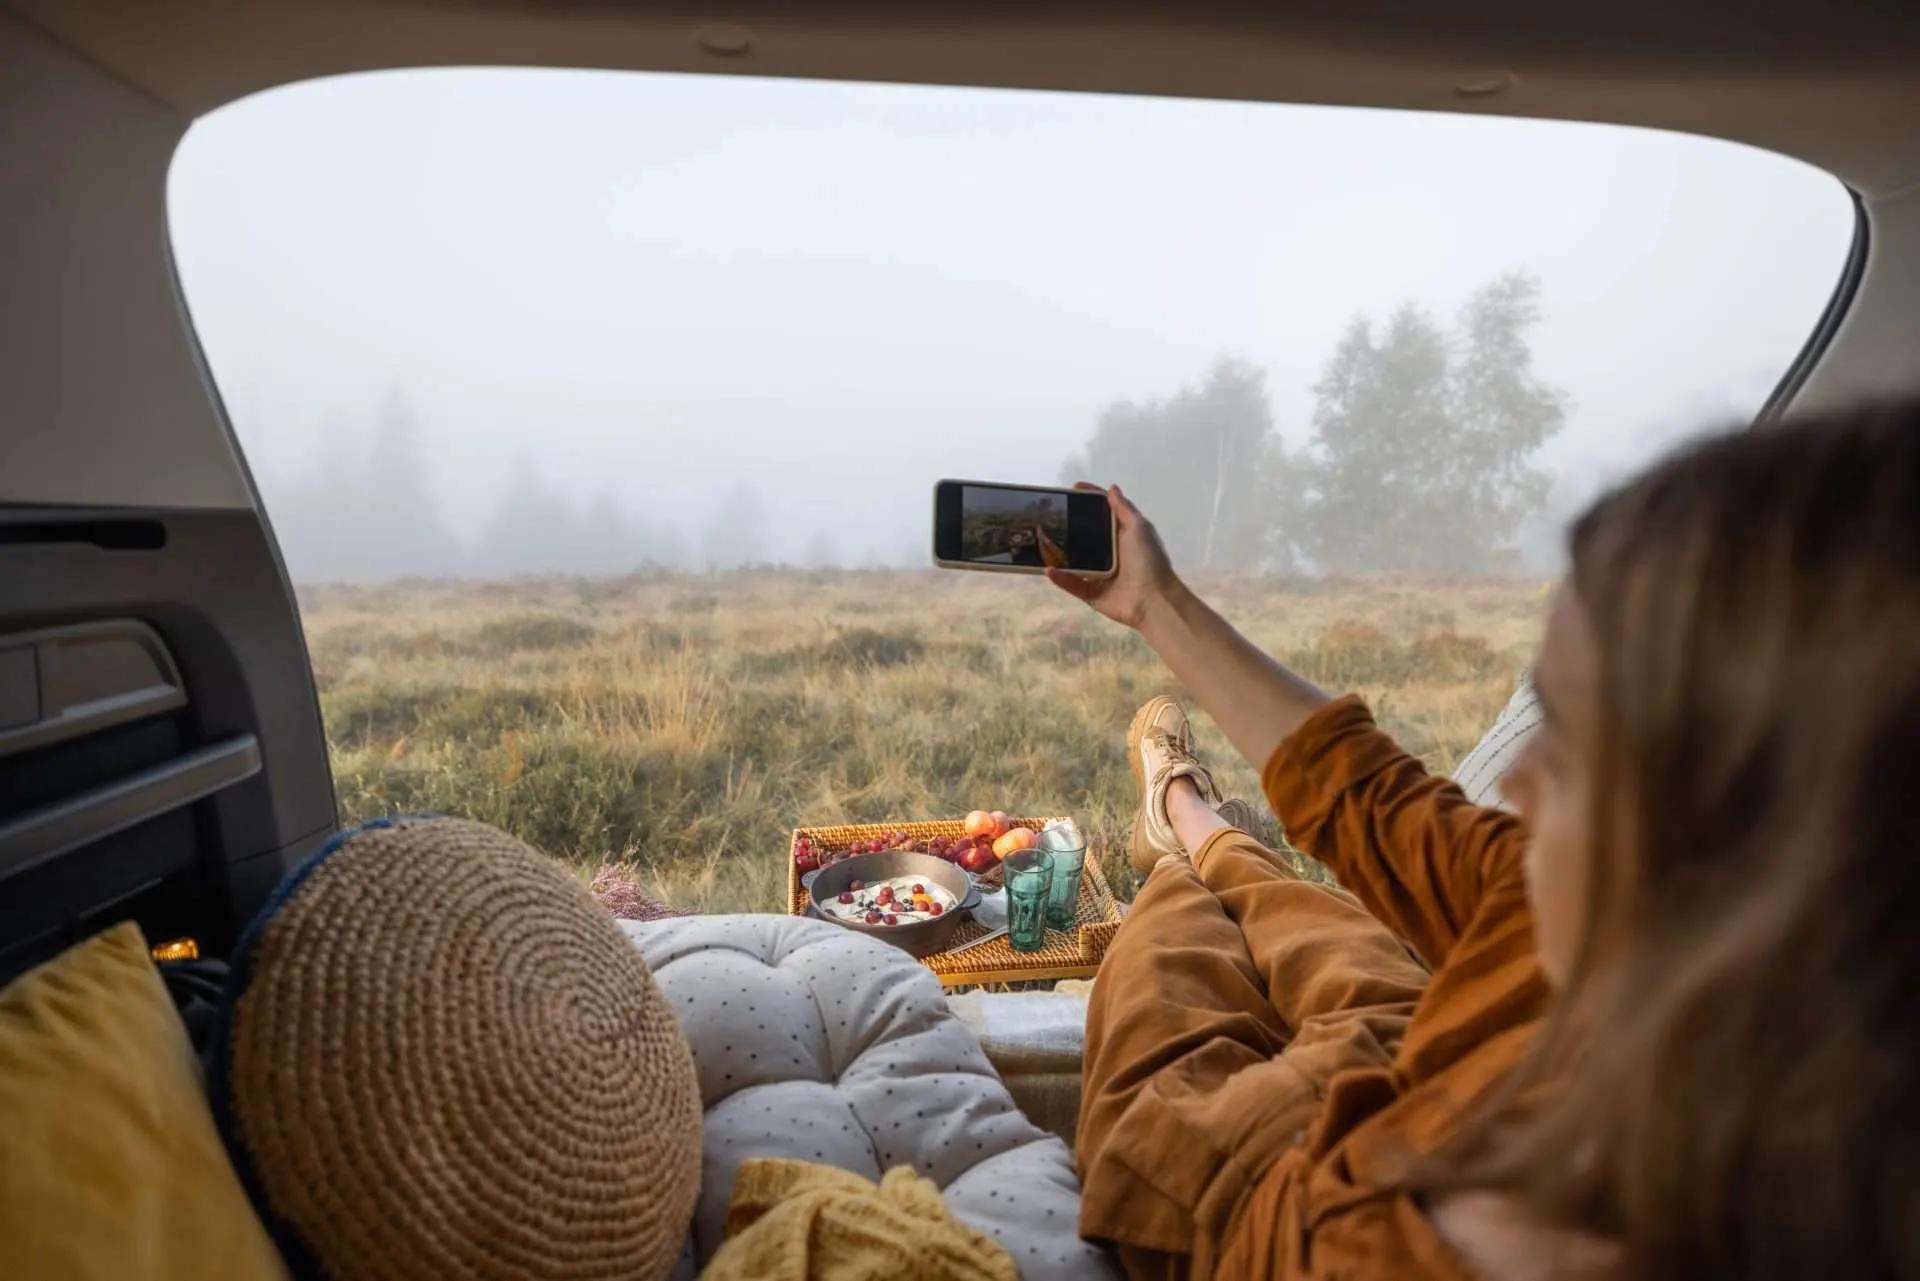 Woman taking photo while laying in bed in the back of her car.